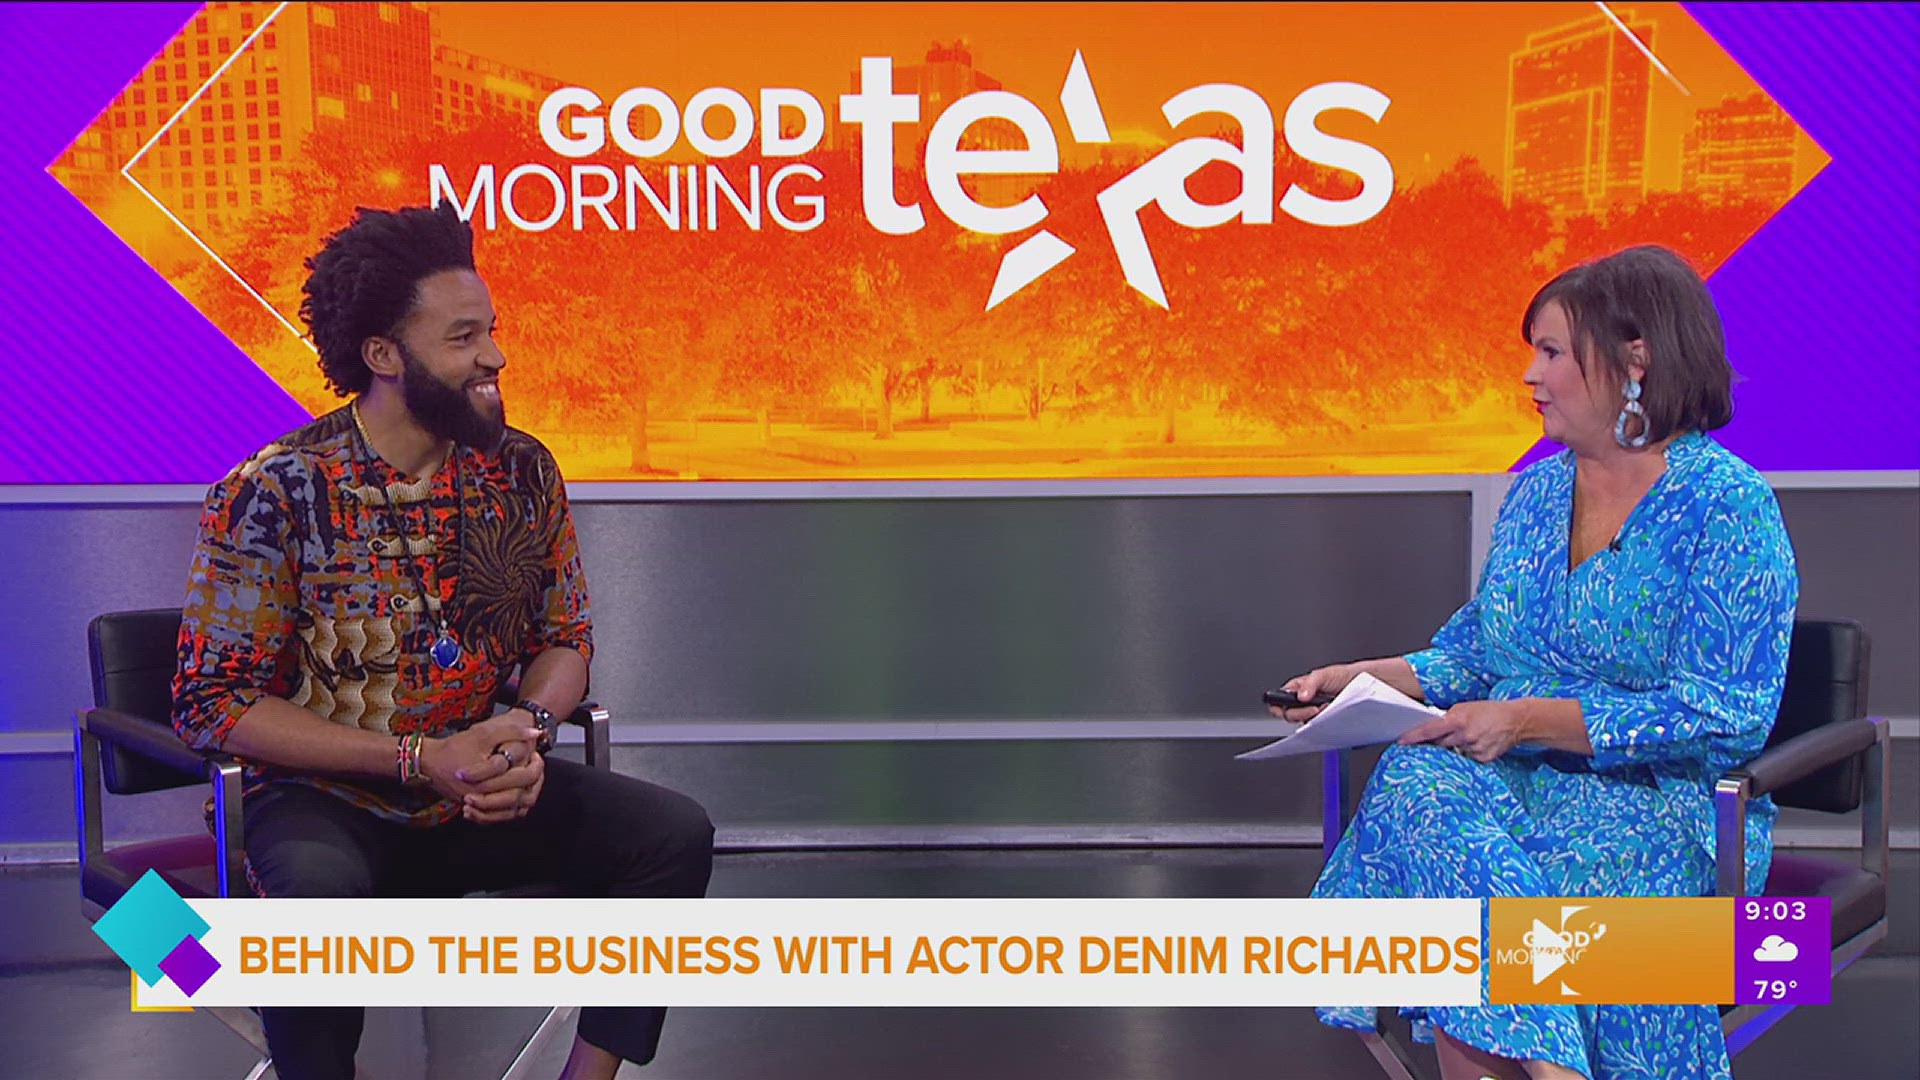 Actor, author, producer & Opulent Entertainment Group CEO Denim Richards talks about the final season of "Yellowstone" and the U.S.-Africa Business Summit in Dallas.